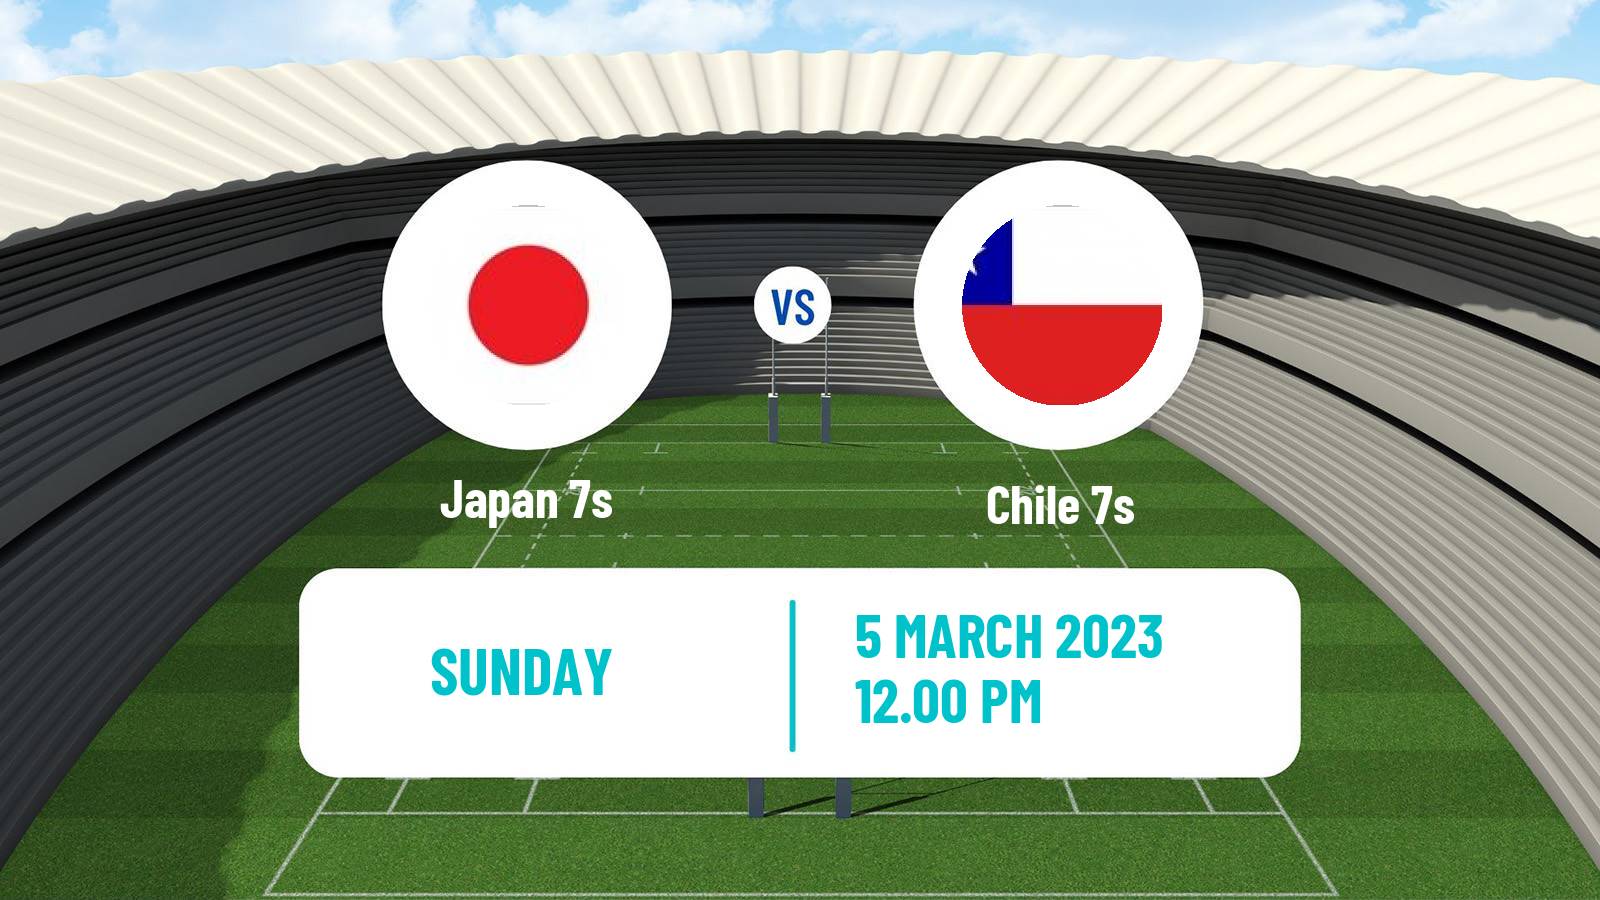 Rugby union Sevens World Series - Canada Japan 7s - Chile 7s